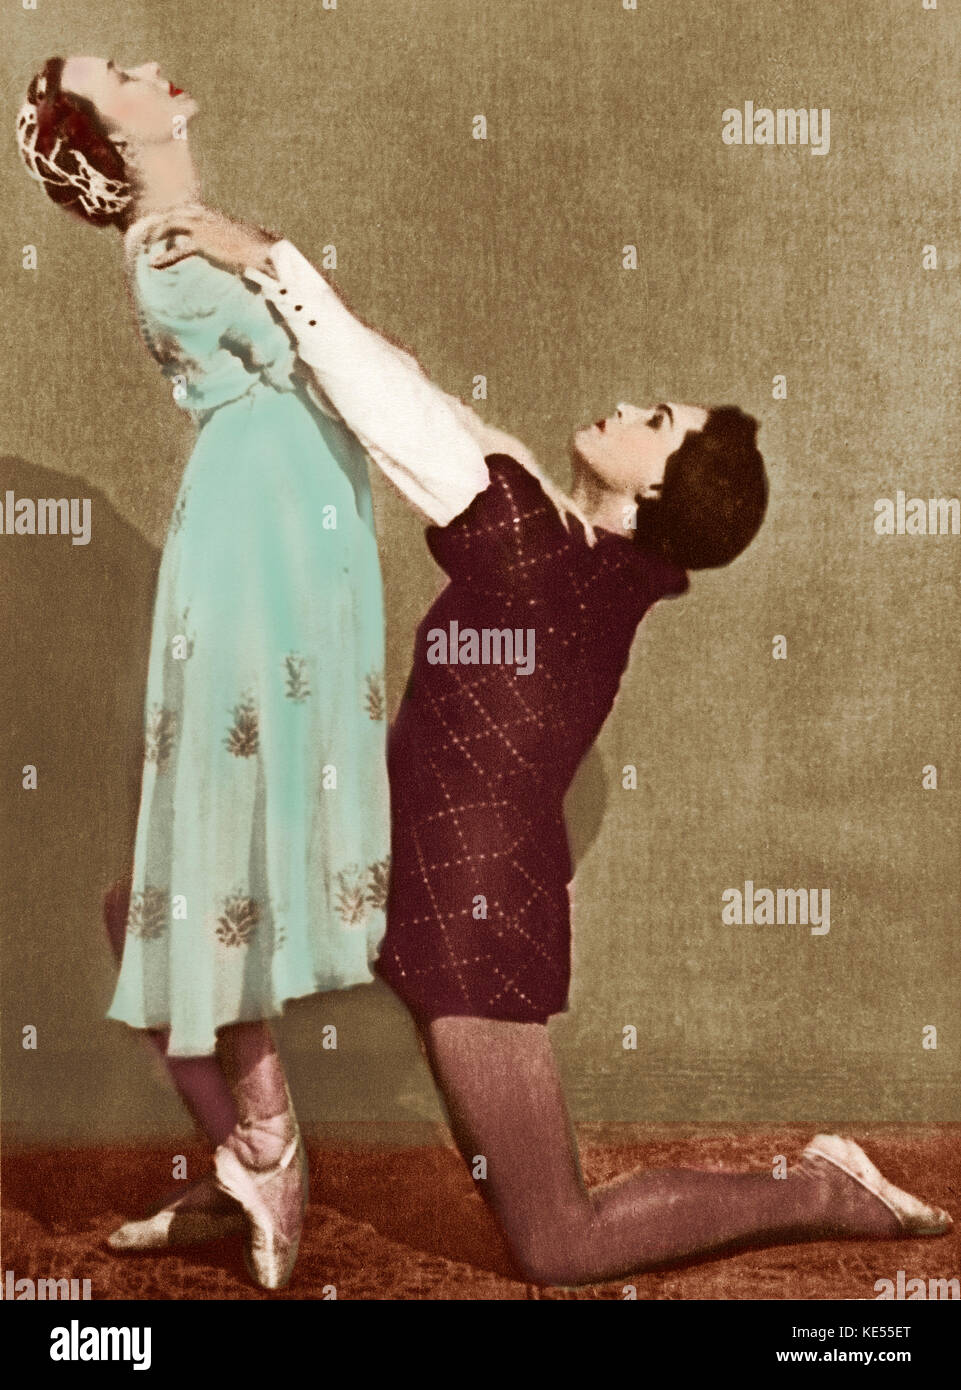 Galina Ulanova and Sergeyev in Sergei Prokofiev 's ballet  'Romeo and Juliet' for the 1940 premiere Kirov, Leningrad -    GU: 8 January 1910 - 21 March 1998. Colourised version. Russian composer, 27 April 1891 - 5 March 1953. Stock Photo